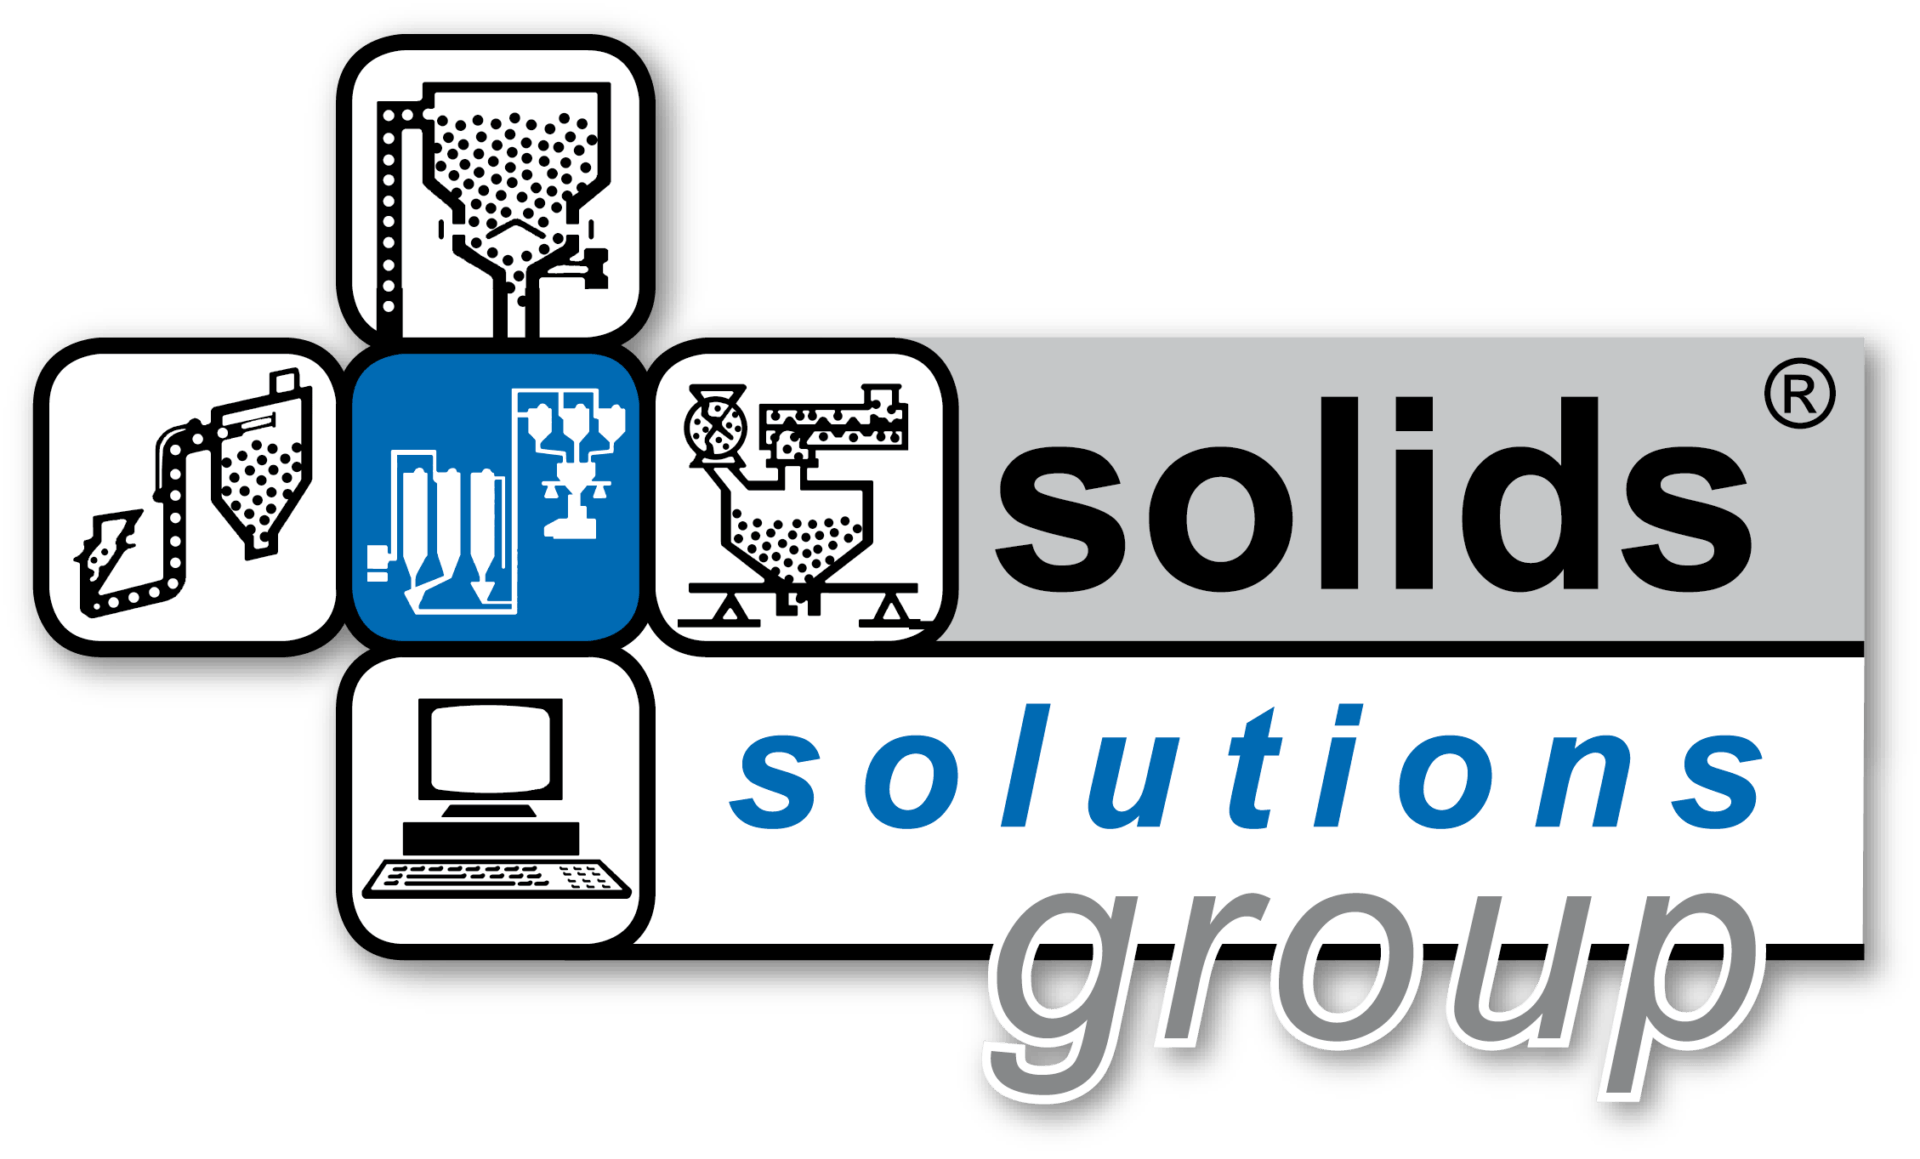 Solids Solutions Group